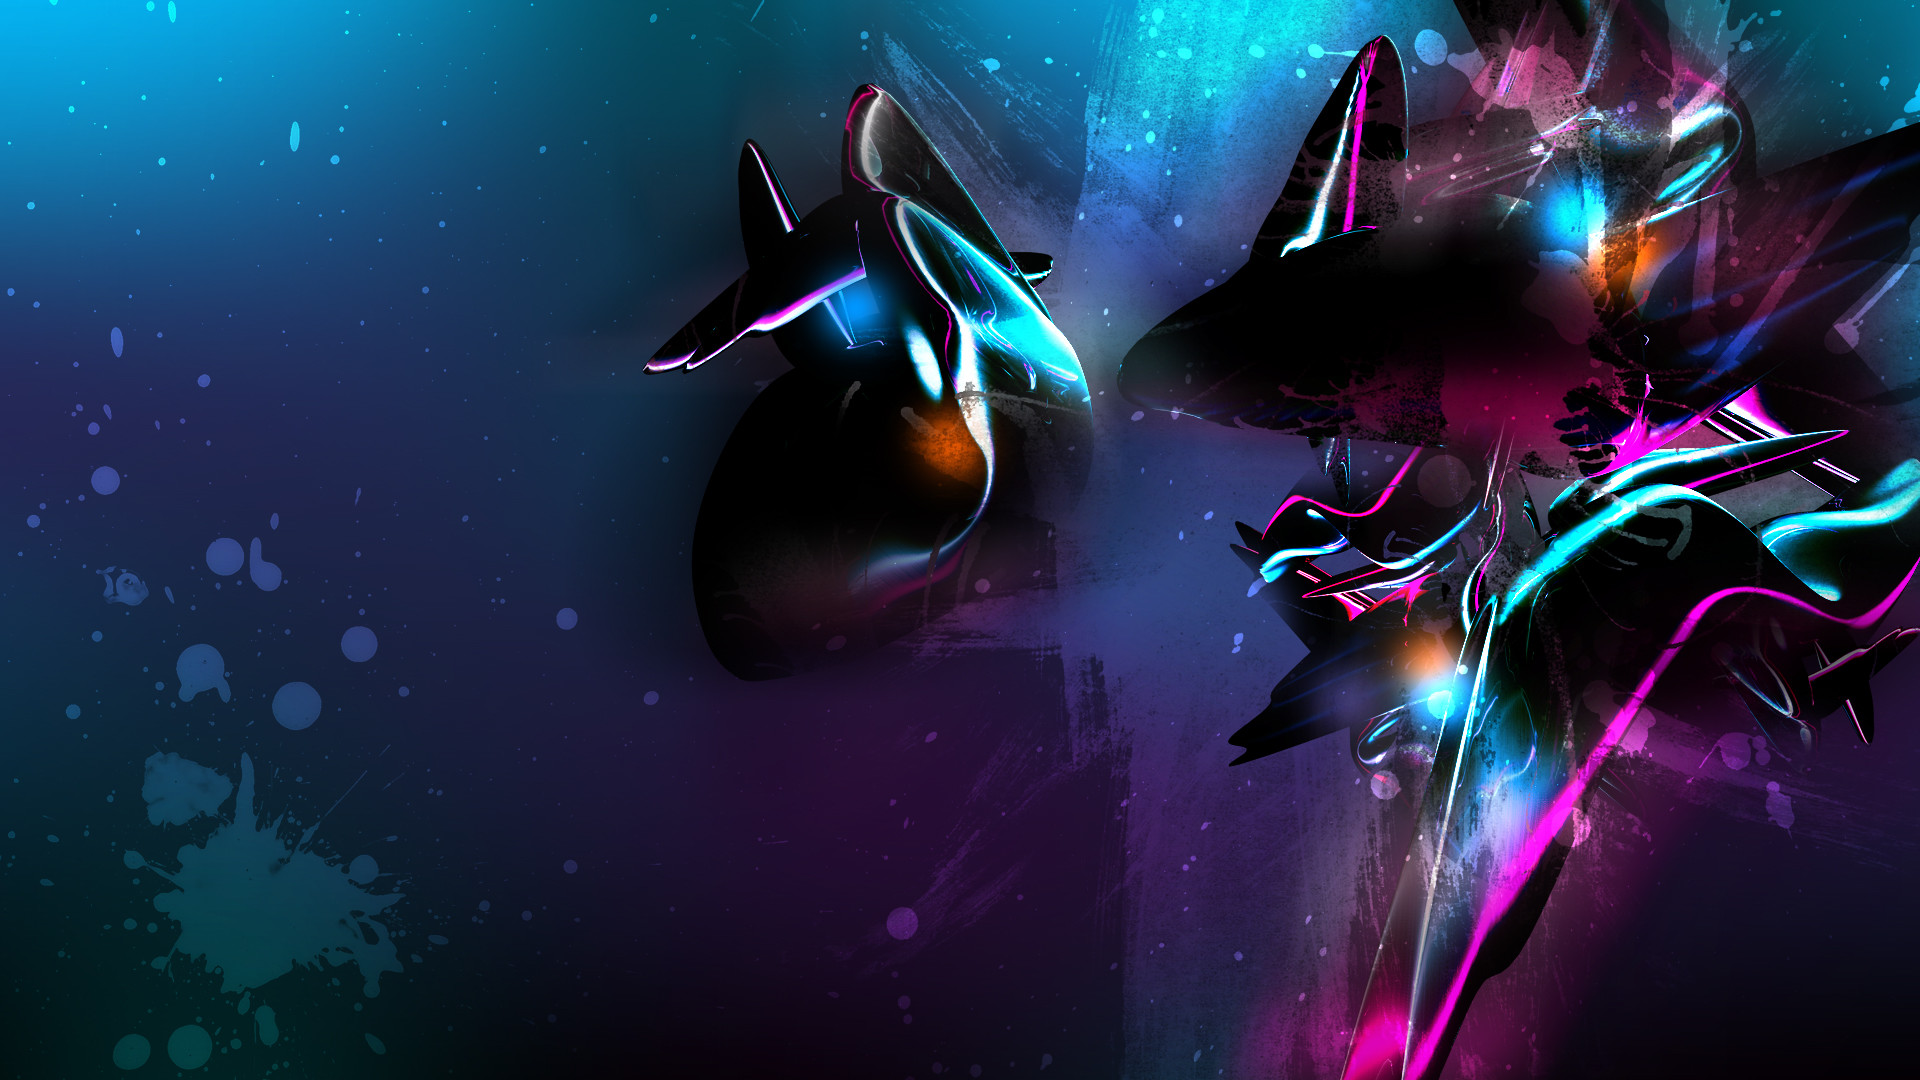 1920x1080 Hd Abstract Anime 720p Wallpaper 1080p #7737 Hd Wallpapers Background .